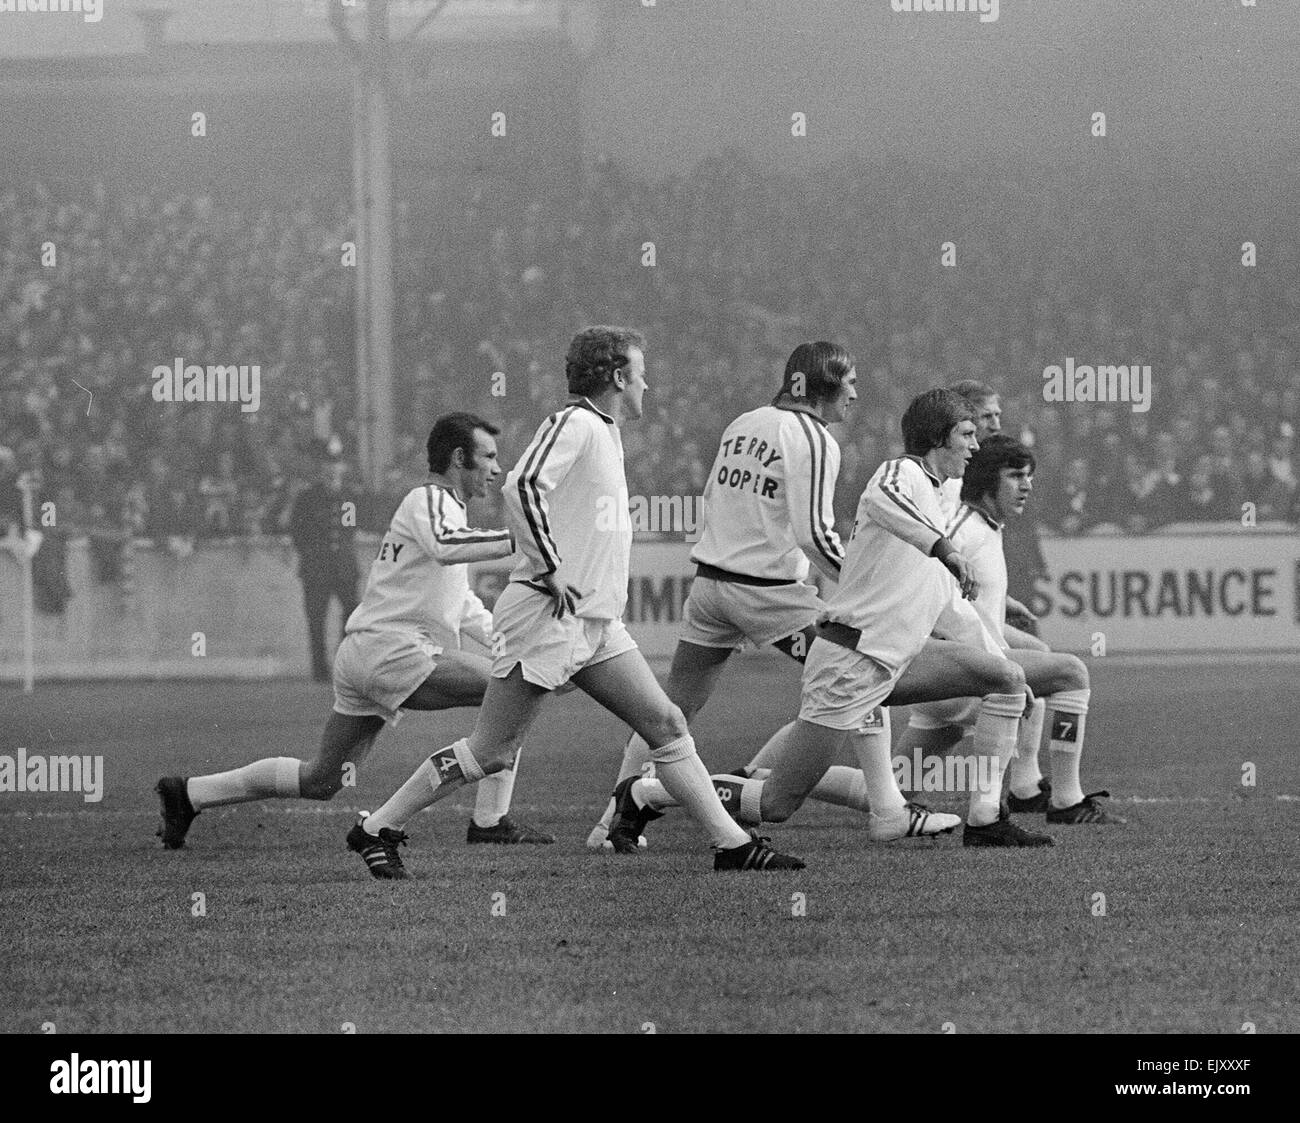 FA Cup Quarter Final match at Elland Road. Leeds United 2 v Tottenham Hotspur 1. The Leeds team warm up before kick off. 18th March 1972.  *** Local Caption *** Billy Bremner Terry Cooper Stock Photo